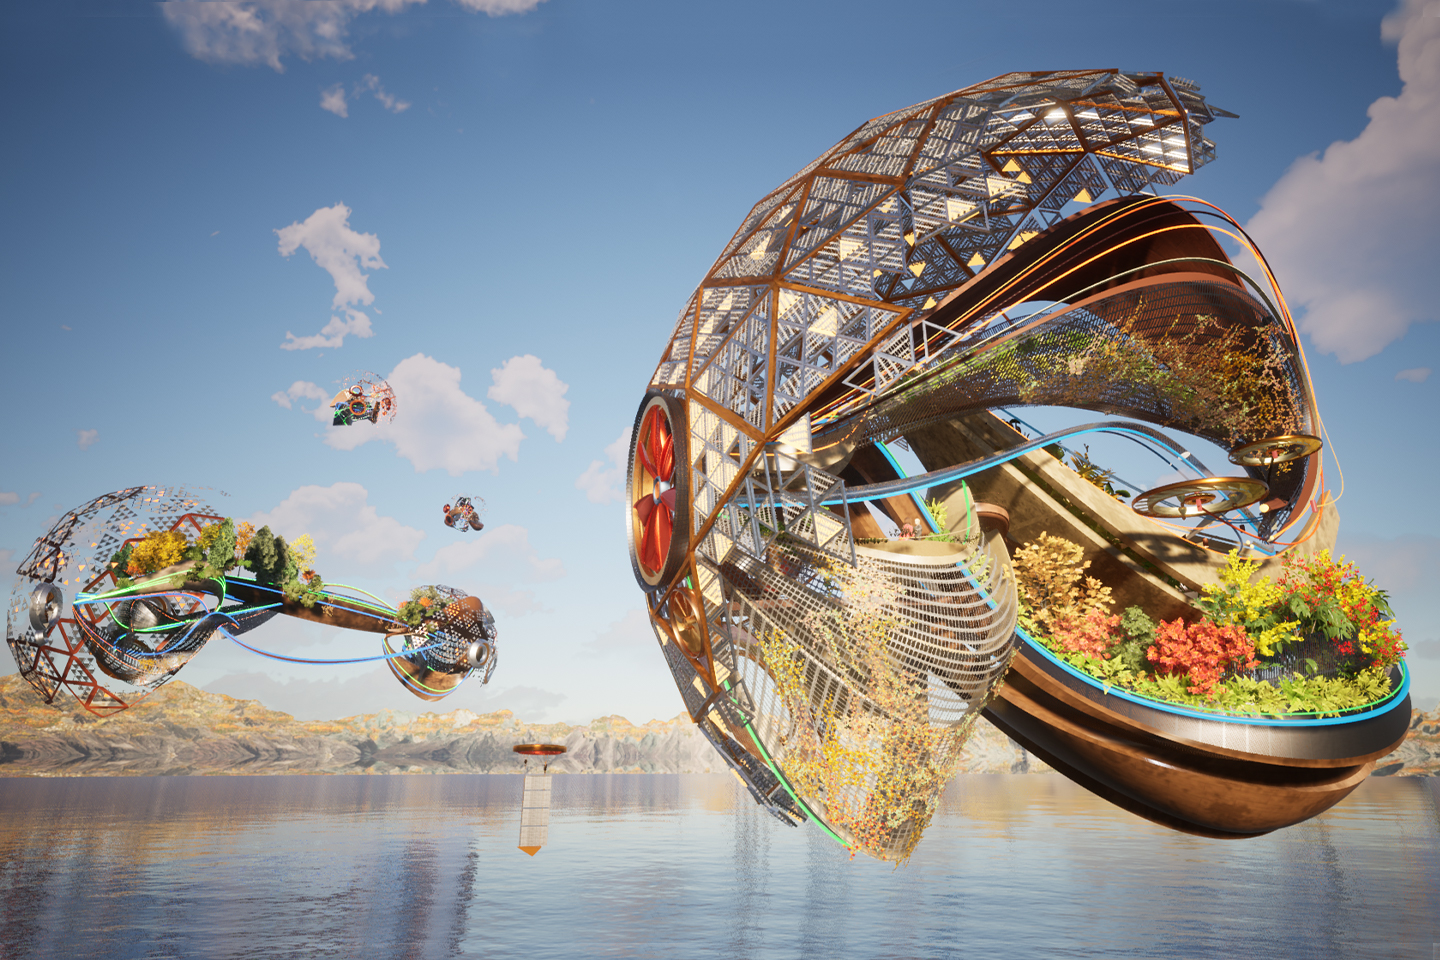 This floating habitat concept captures carbon from the air and converts it into electricity!